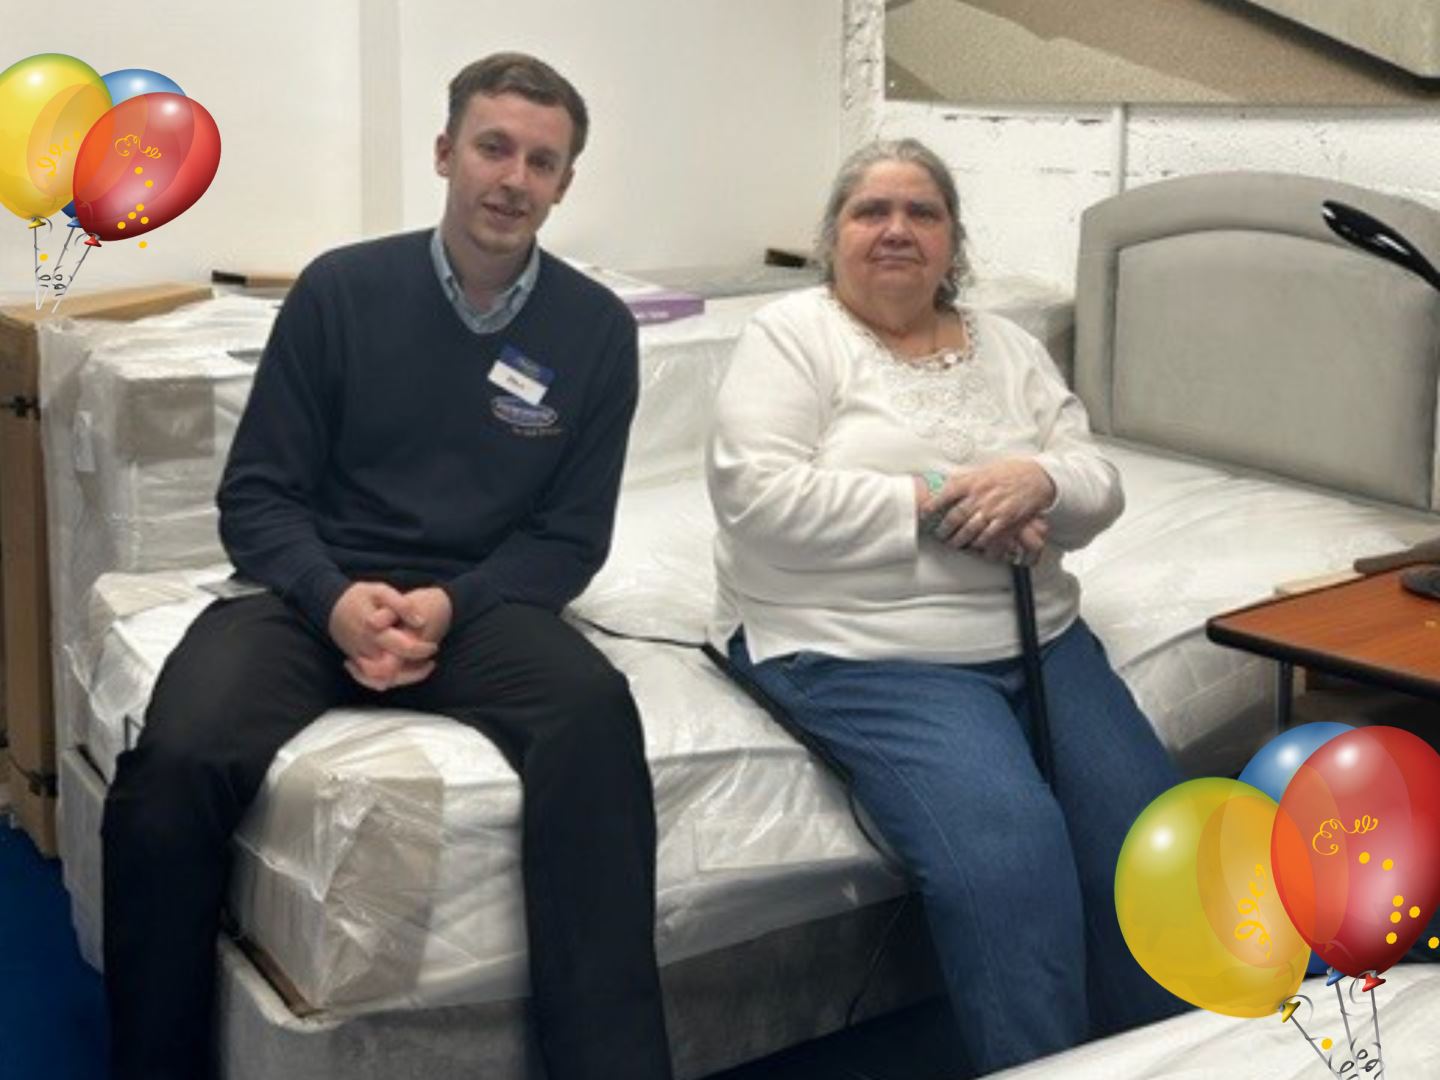 Ableworld Thatcham manager with the winner of the in-store Adjustable Bed Competition